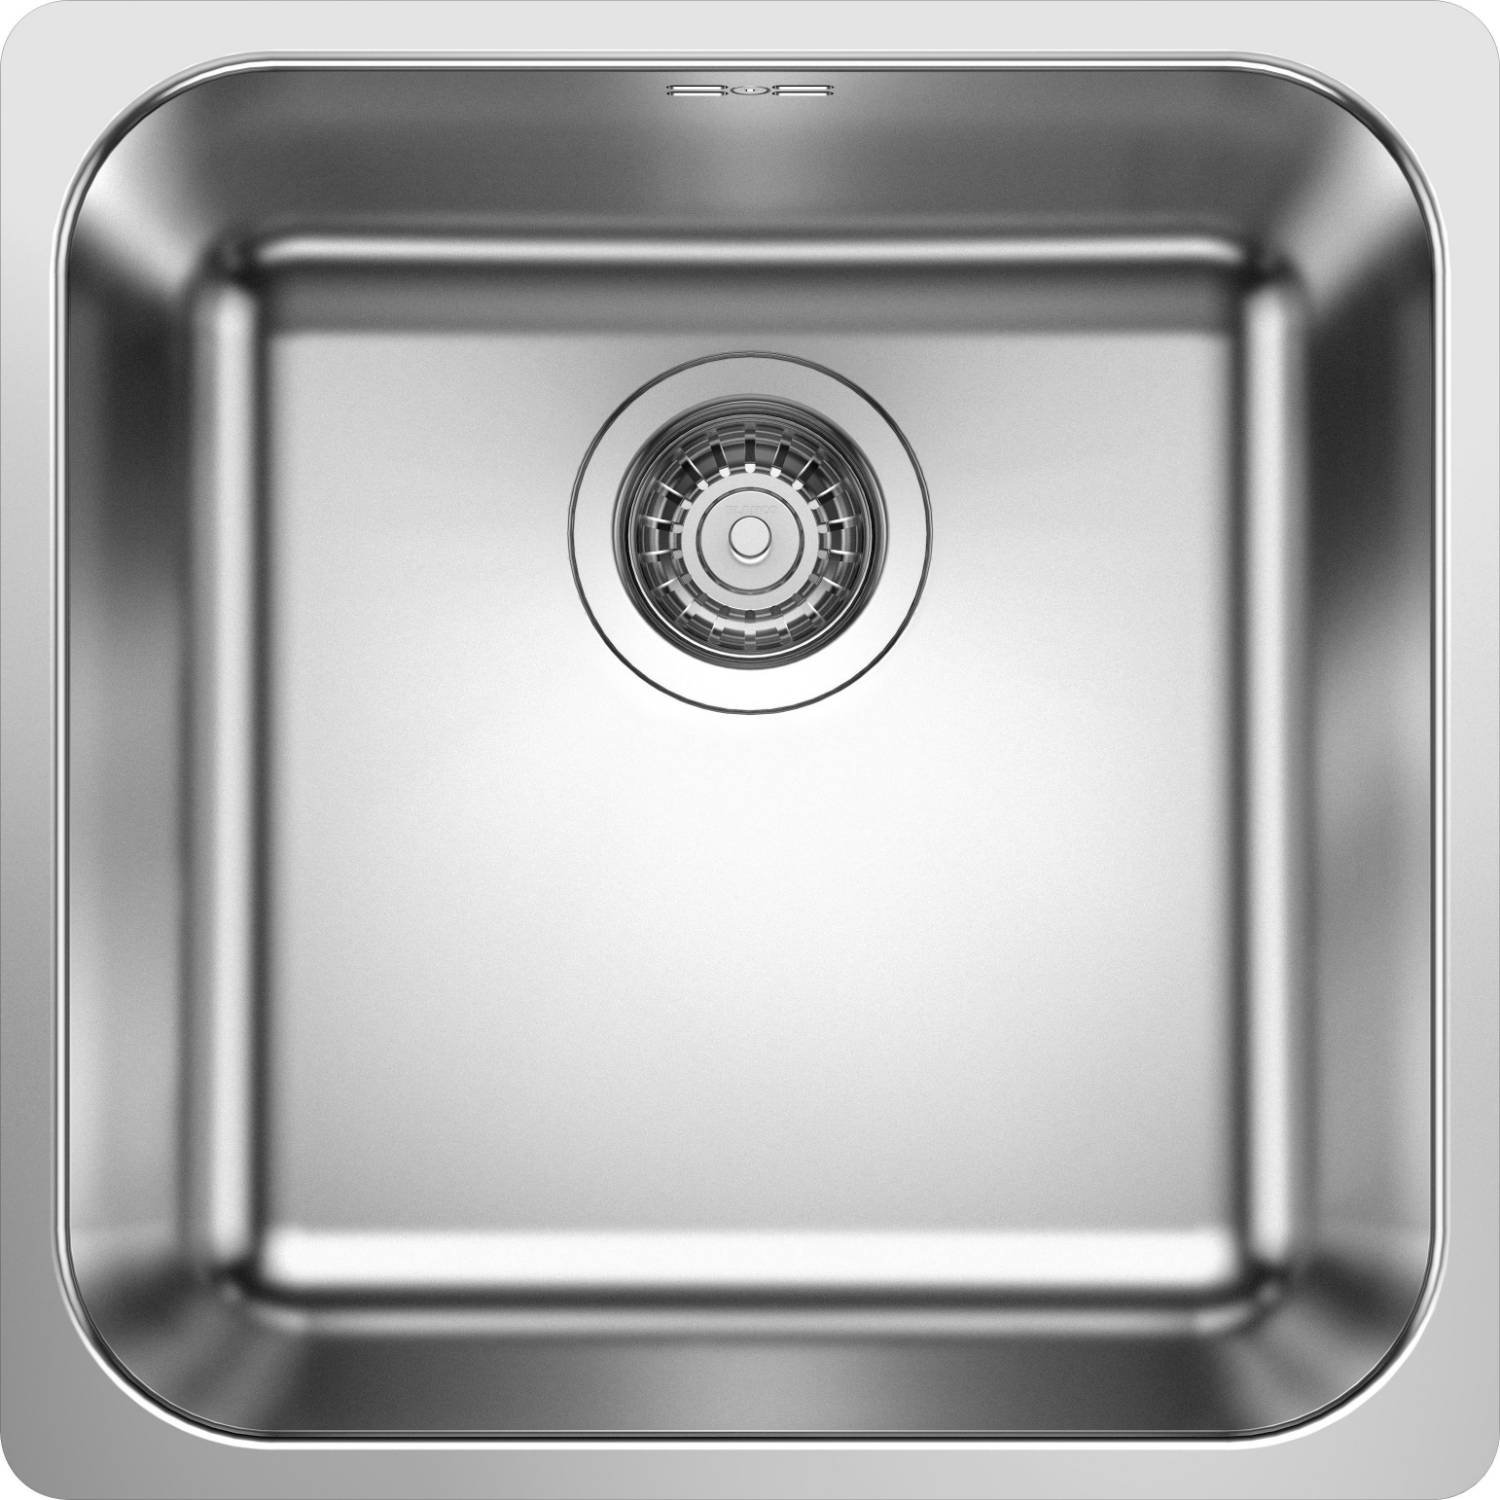 Supra Stainless Steel Inset Single Bowl